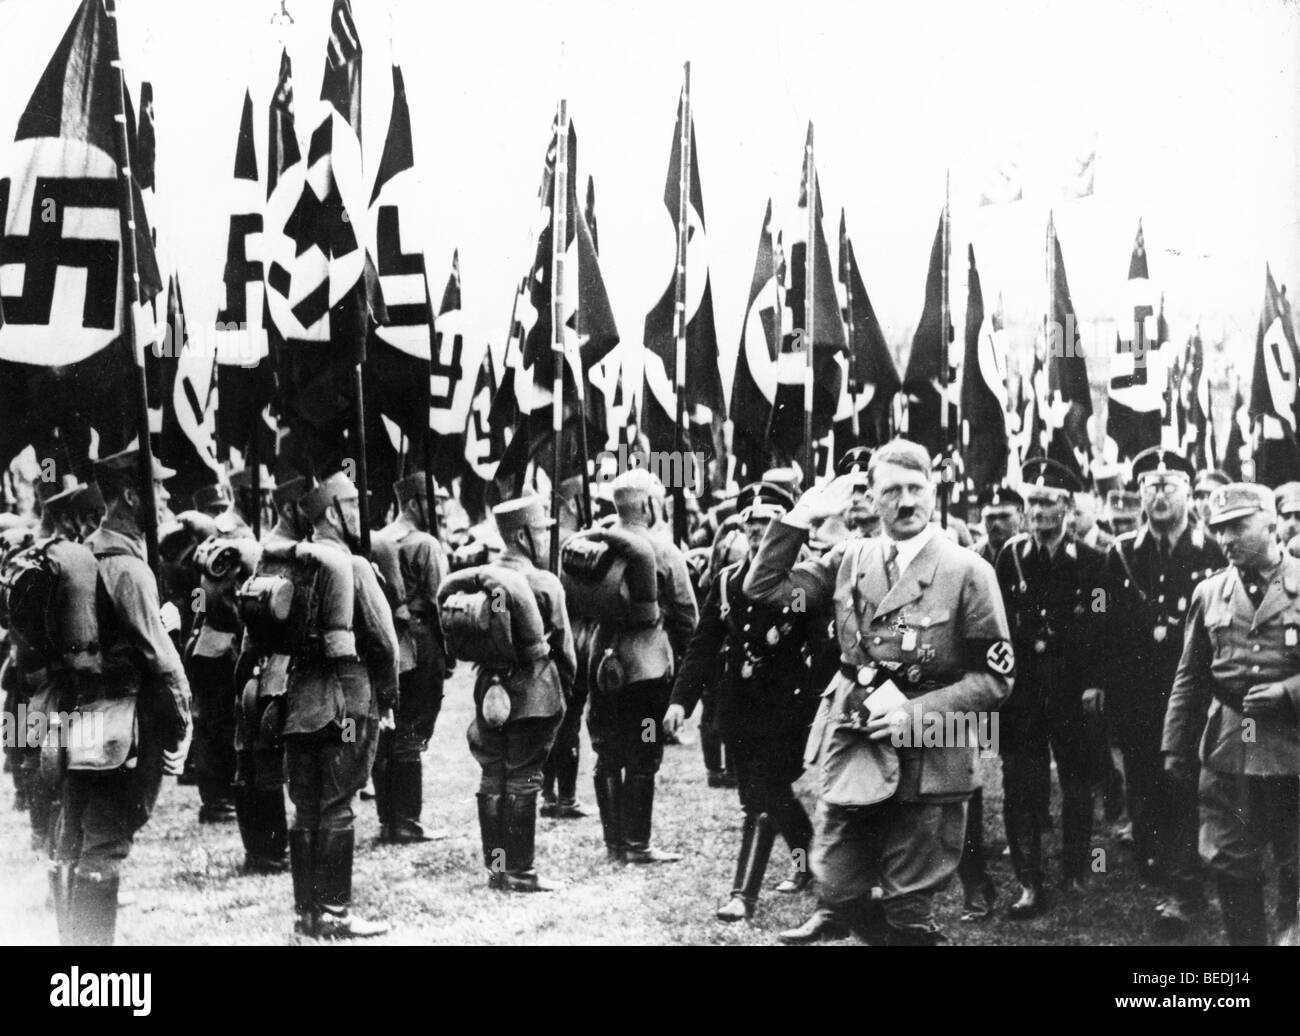 Adolf Hitler in Nuremberg Germany with troops Stock Photo